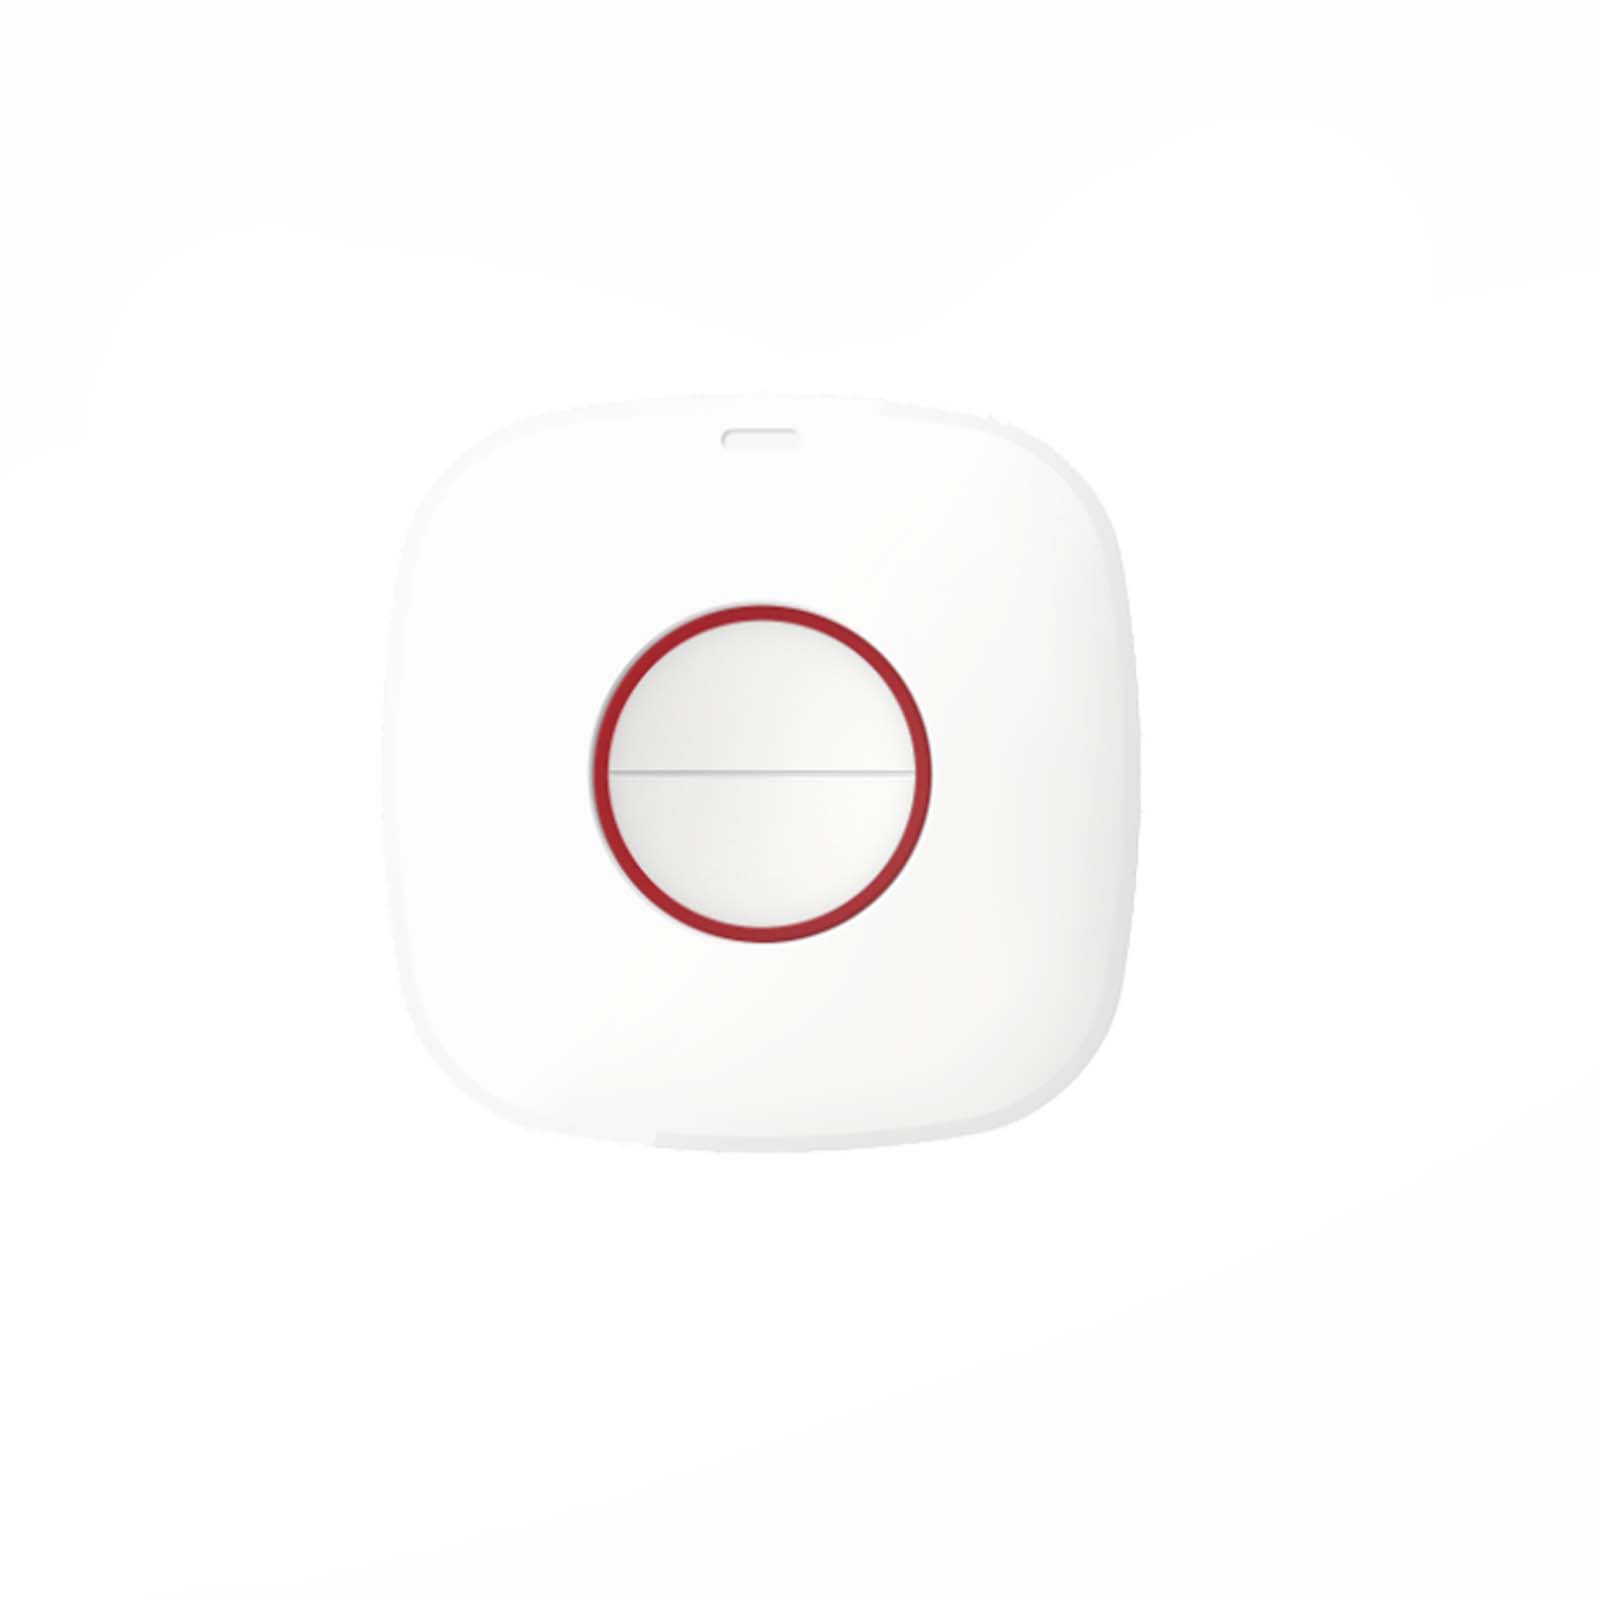 Hikvision Axiom emergency button